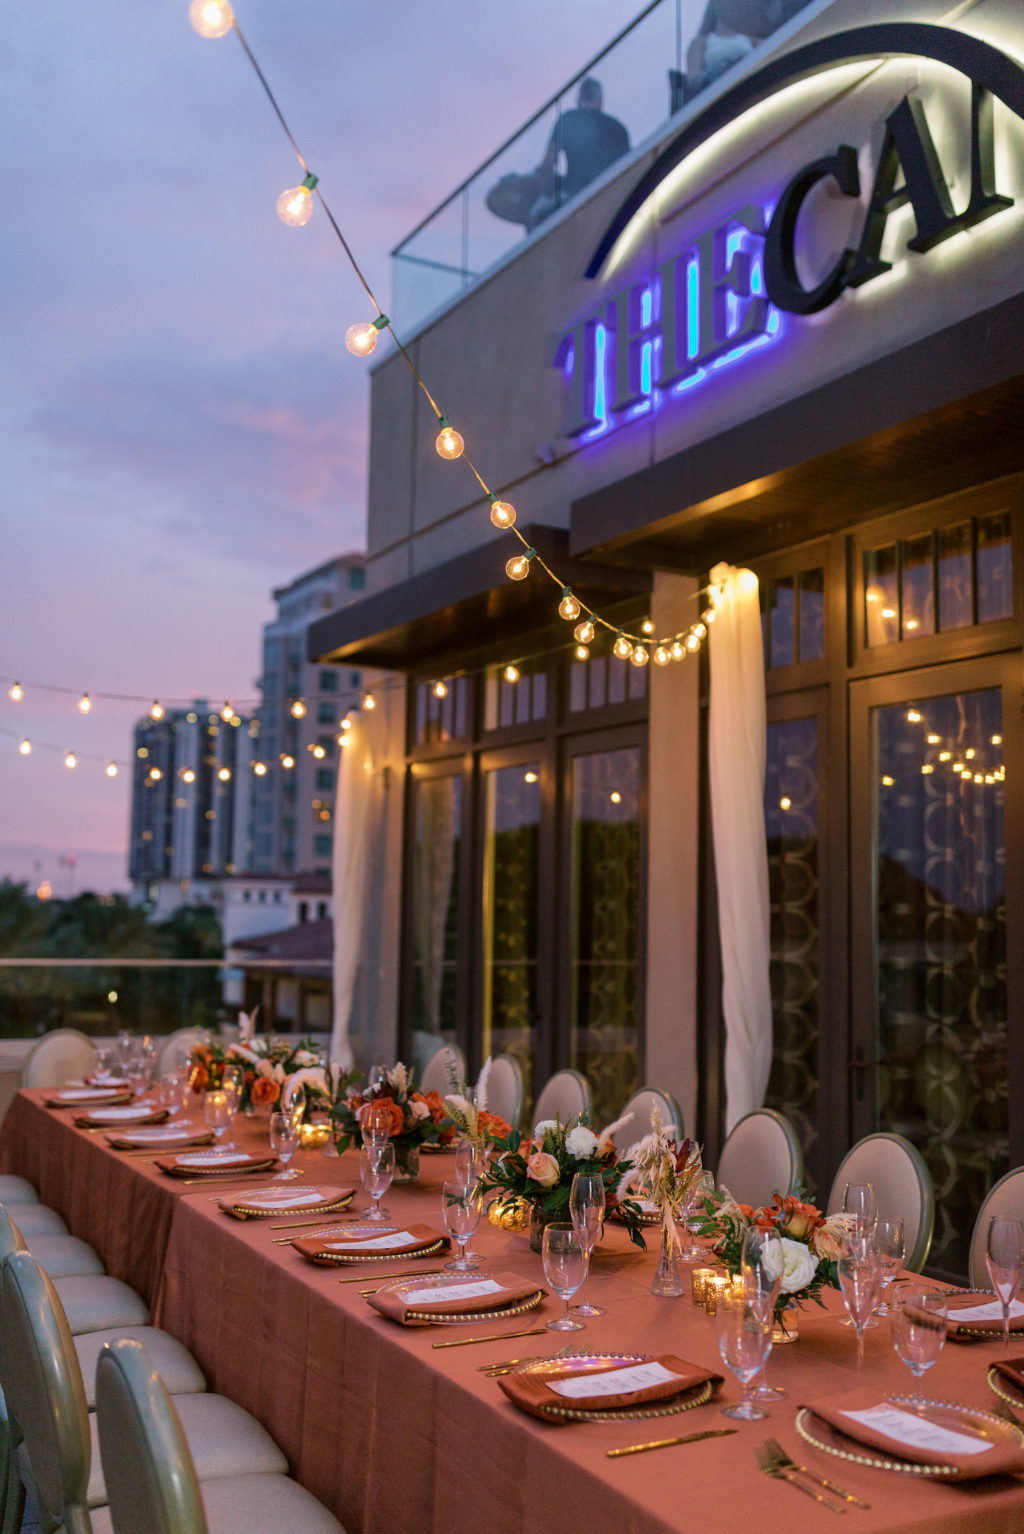 Outdoor Terrace Wedding Feasting Table at St. Pete Wedding Venue The Birchwood | Intimate Micro Wedding Elopement COVID Styled Shoot | Fall Autumn Wedding Inspiration | Hotel Terrace Reception with Canopy String Lights Orange Copper Wedding Table Linens | Gold Beaded Glass Chargers with Napkin and Menu Card and Gold Flatware | Wedding Centerpiece with Orange White and Peach Roses | Outdoor Terrace Wedding Feasting Table at St. Pete Wedding Venue The Birchwood | Intimate Micro Wedding Elopement COVID Styled Shoot | Fall Autumn Wedding Inspiration | Hotel Terrace Reception with Canopy String Lights Orange Copper Wedding Table Linens | Gold Beaded Glass Chargers with Napkin and Menu Card and Gold Flatware | Wedding Centerpiece with Orange White and Peach Roses | Outdoor Terrace Wedding Feasting Table at St. Pete Wedding Venue The Birchwood | Intimate Micro Wedding Elopement COVID Styled Shoot | Fall Autumn Wedding Inspiration | Hotel Terrace Reception with Canopy String Lights Orange Copper Wedding Table Linens | Gold Beaded Glass Chargers with Napkin and Menu Card and Gold Flatware | Wedding Centerpiece with Orange White and Peach Roses | St. Petersburg Wedding Planner Breezin' Weddings